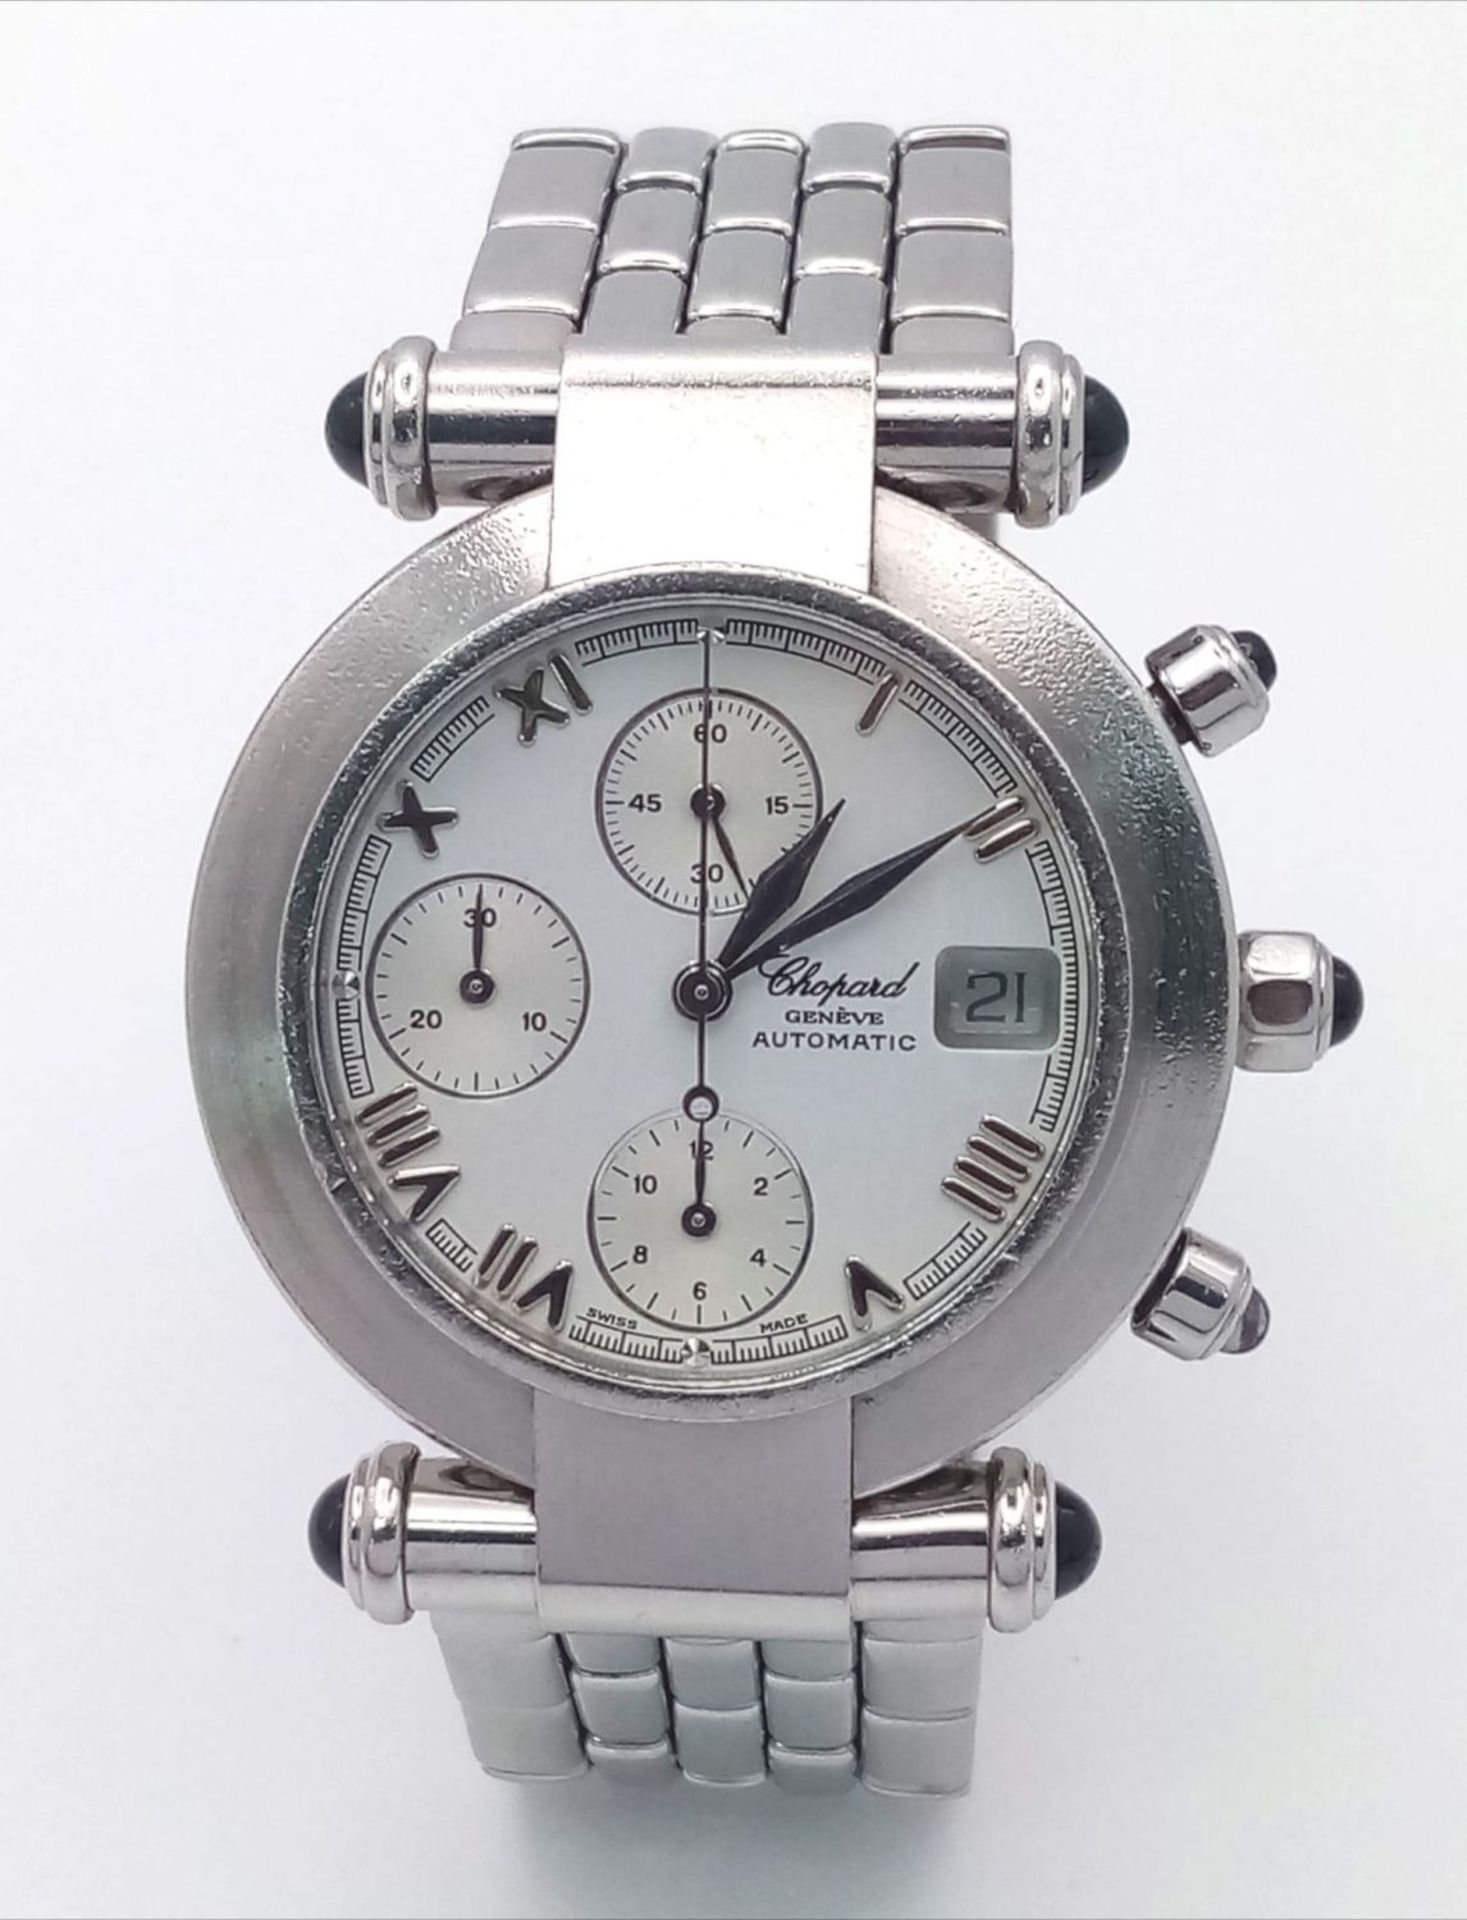 A Chopard Automatic Chronograph Gents Watch. Stainless steel bracelet and case - 37mm. White dial - Image 3 of 16